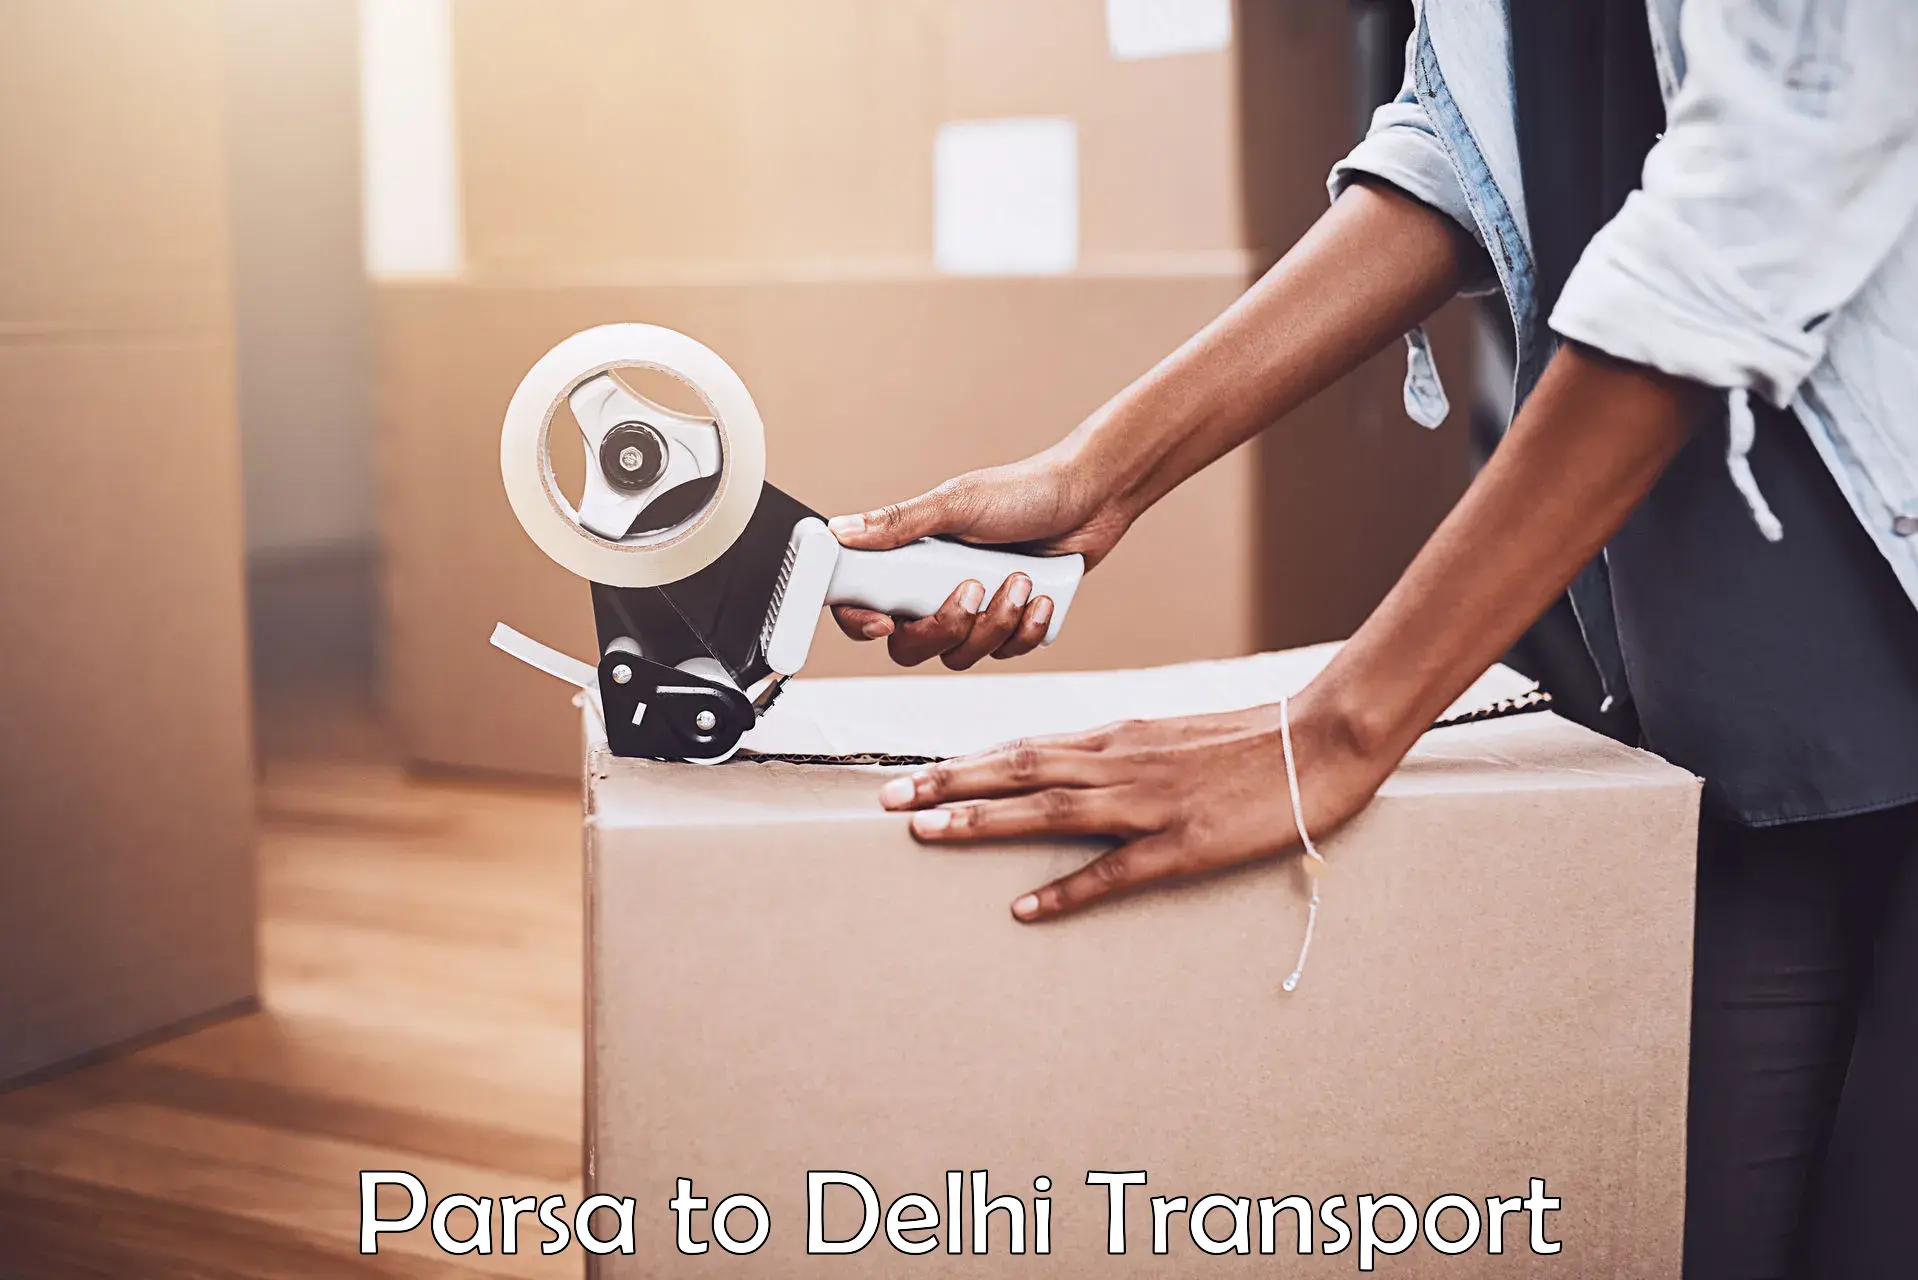 Truck transport companies in India Parsa to NCR